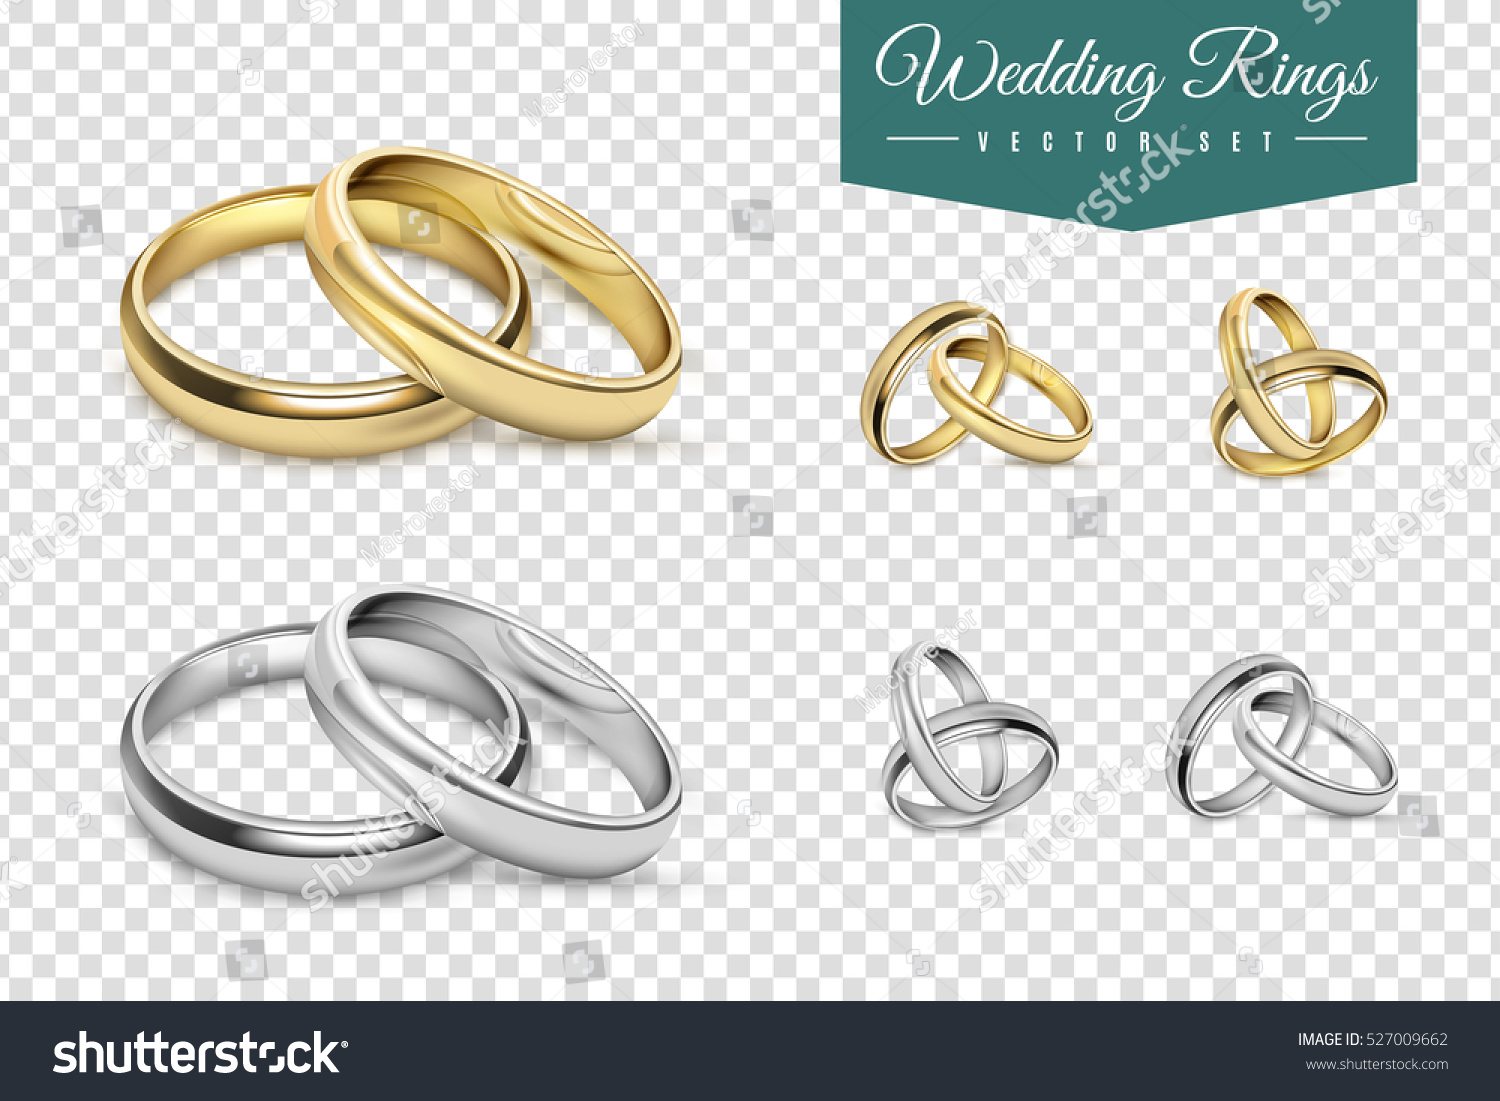 Wedding rings set of gold and silver metal on transparent background isolated vector illustration #527009662